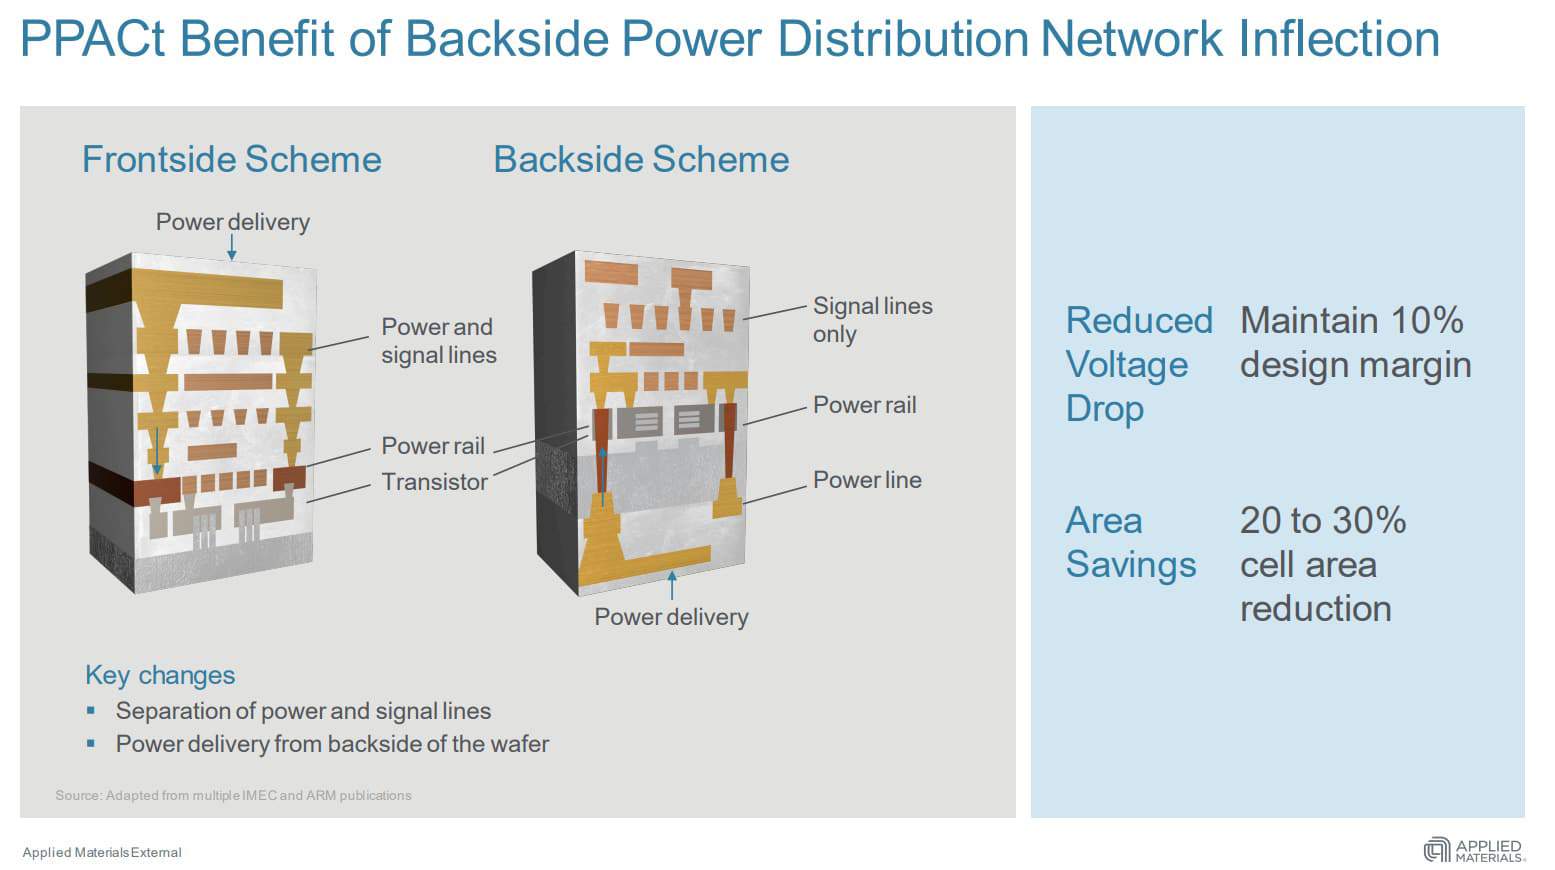 ppact benefit of backside power distribution network